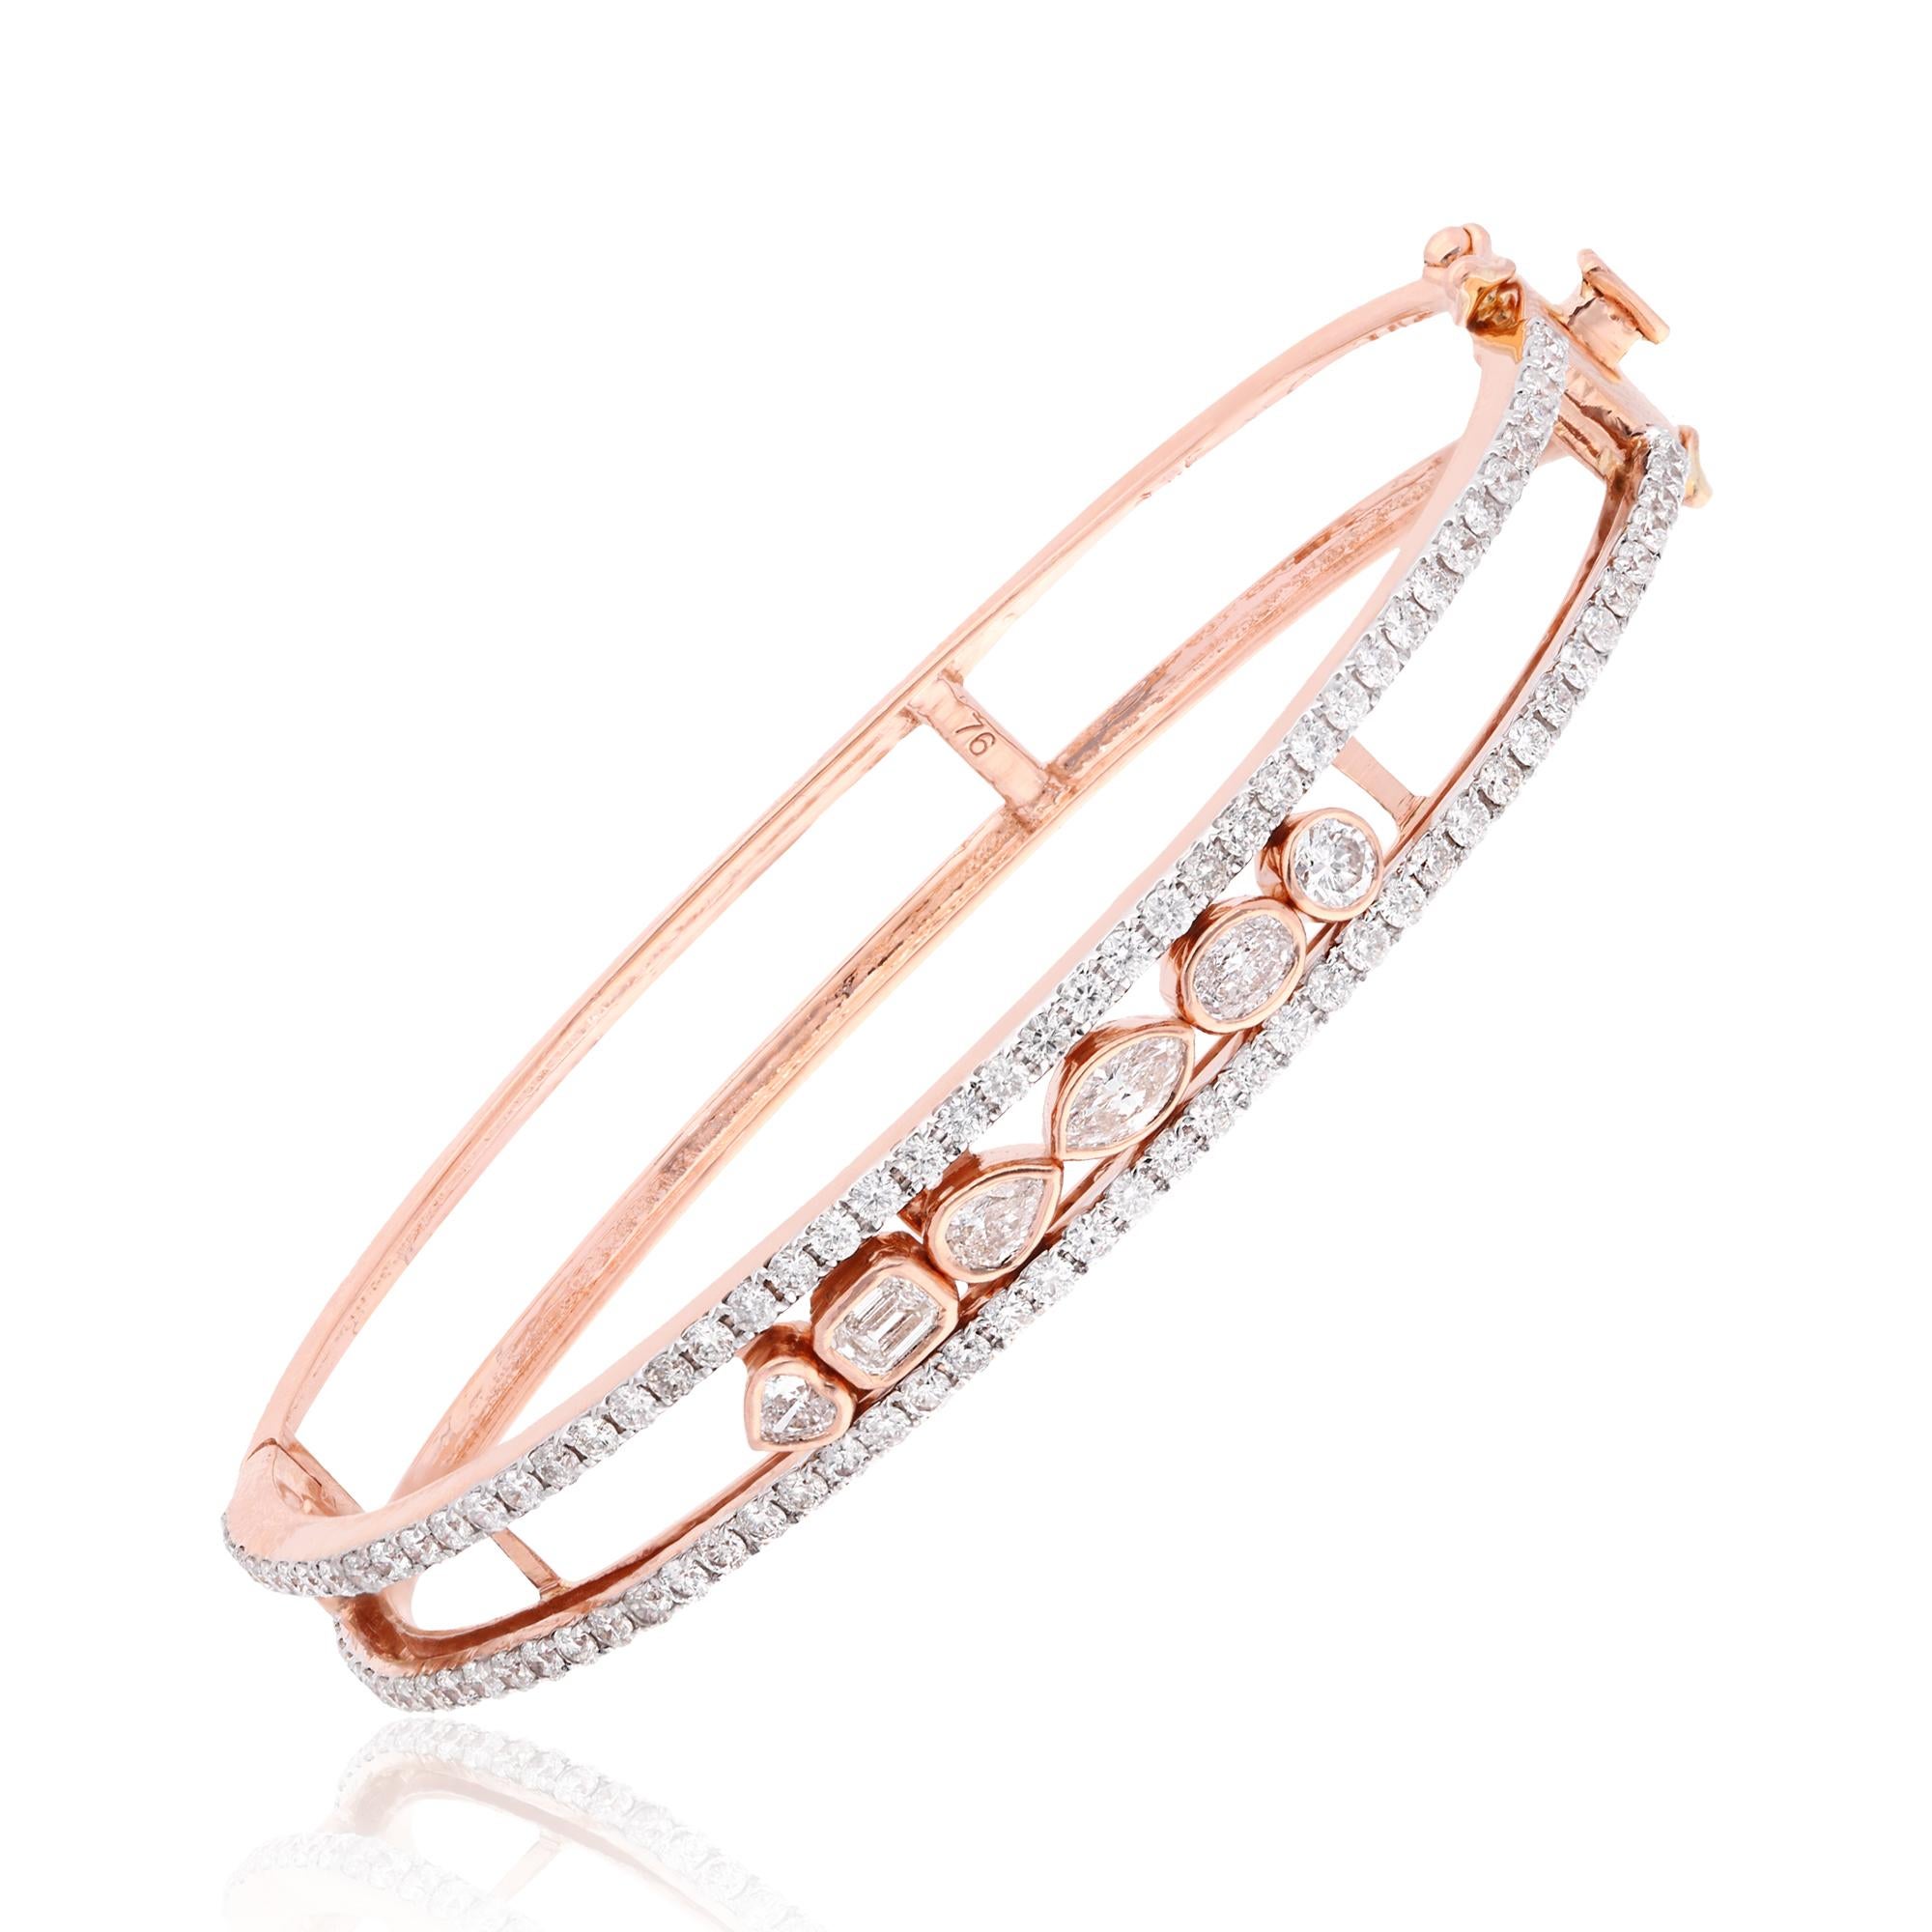 Item Code :- SEB-6324
Gross Weight :- 16.53 gm
18k Rose Gold Weight :- 16.07 gm
Natural Diamond Weight :- 2.30 carat  ( AVERAGE DIAMOND CLARITY SI1-SI2 & COLOR H-I )
Bracelet Size :- 59 mm approx. 

✦ Sizing
.....................
We can adjust most